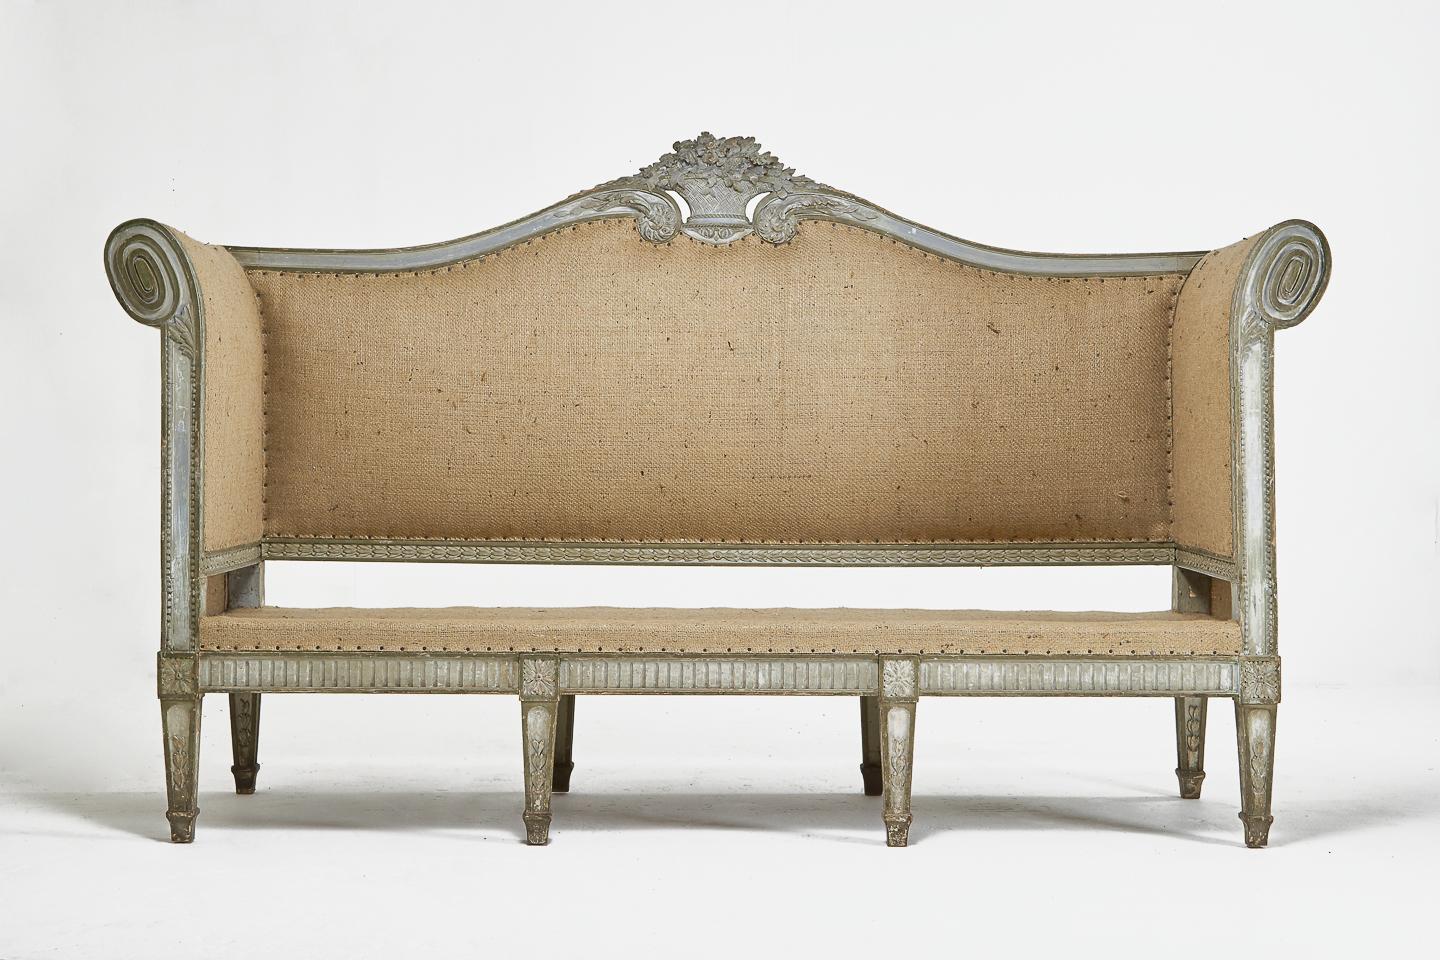 A beautifully carved large 18th century French sofa with original paint. Feathered seat pad upholstered in a vintage French cotton linen mix fabric. Carcass upholstered in hessian and is ready to recover or can be used as it is.